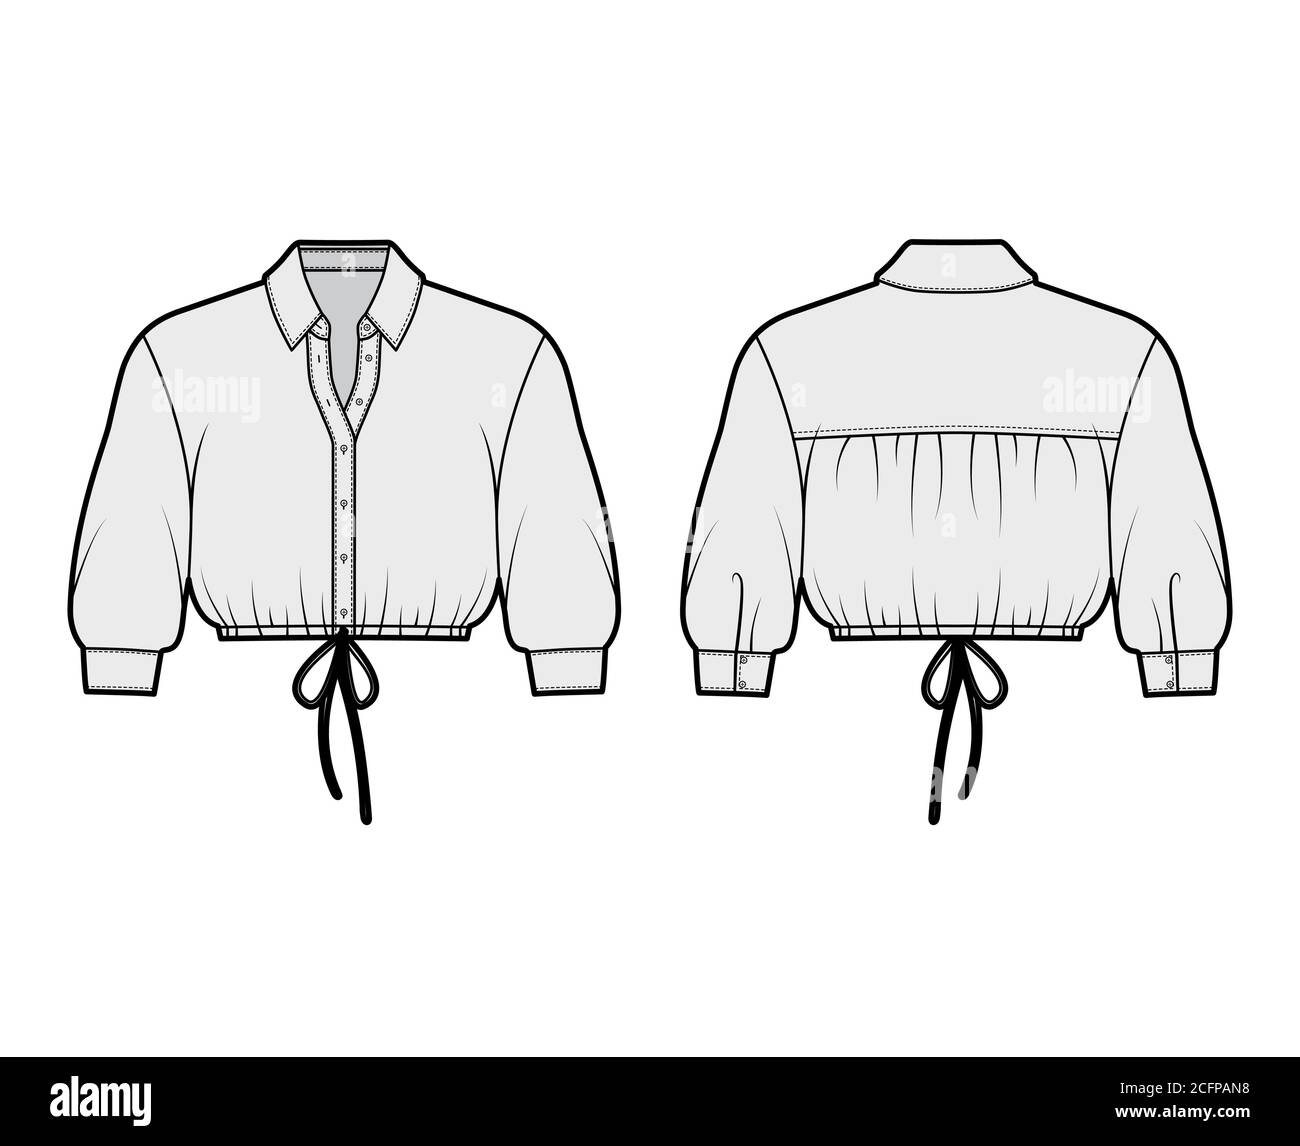 Cropped shirt technical fashion illustration with basic collar